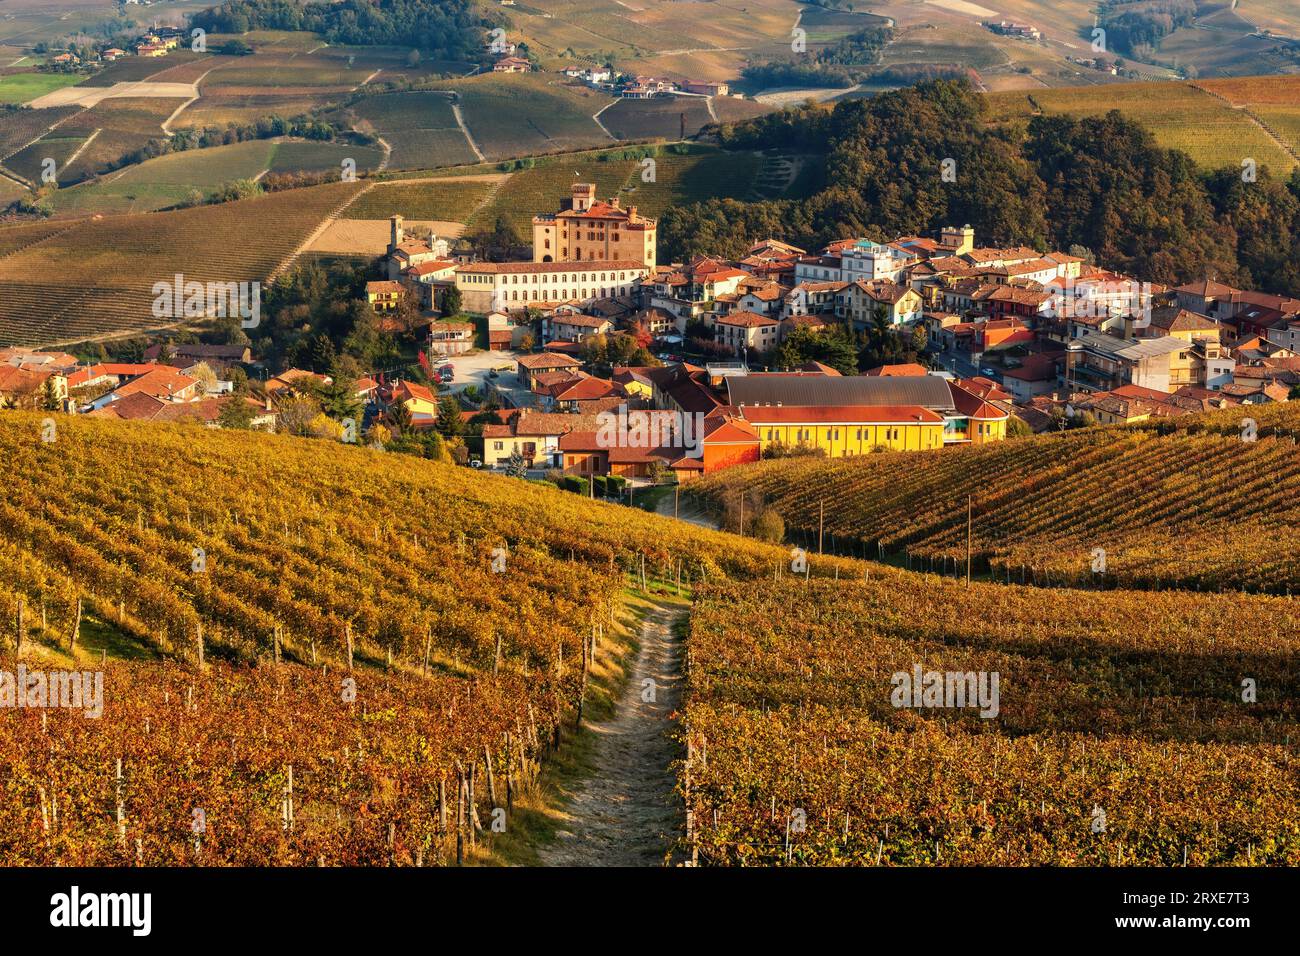 View of the hills with autumnal vineyards and small town of Barolo in Piedmont, Italy. Stock Photo